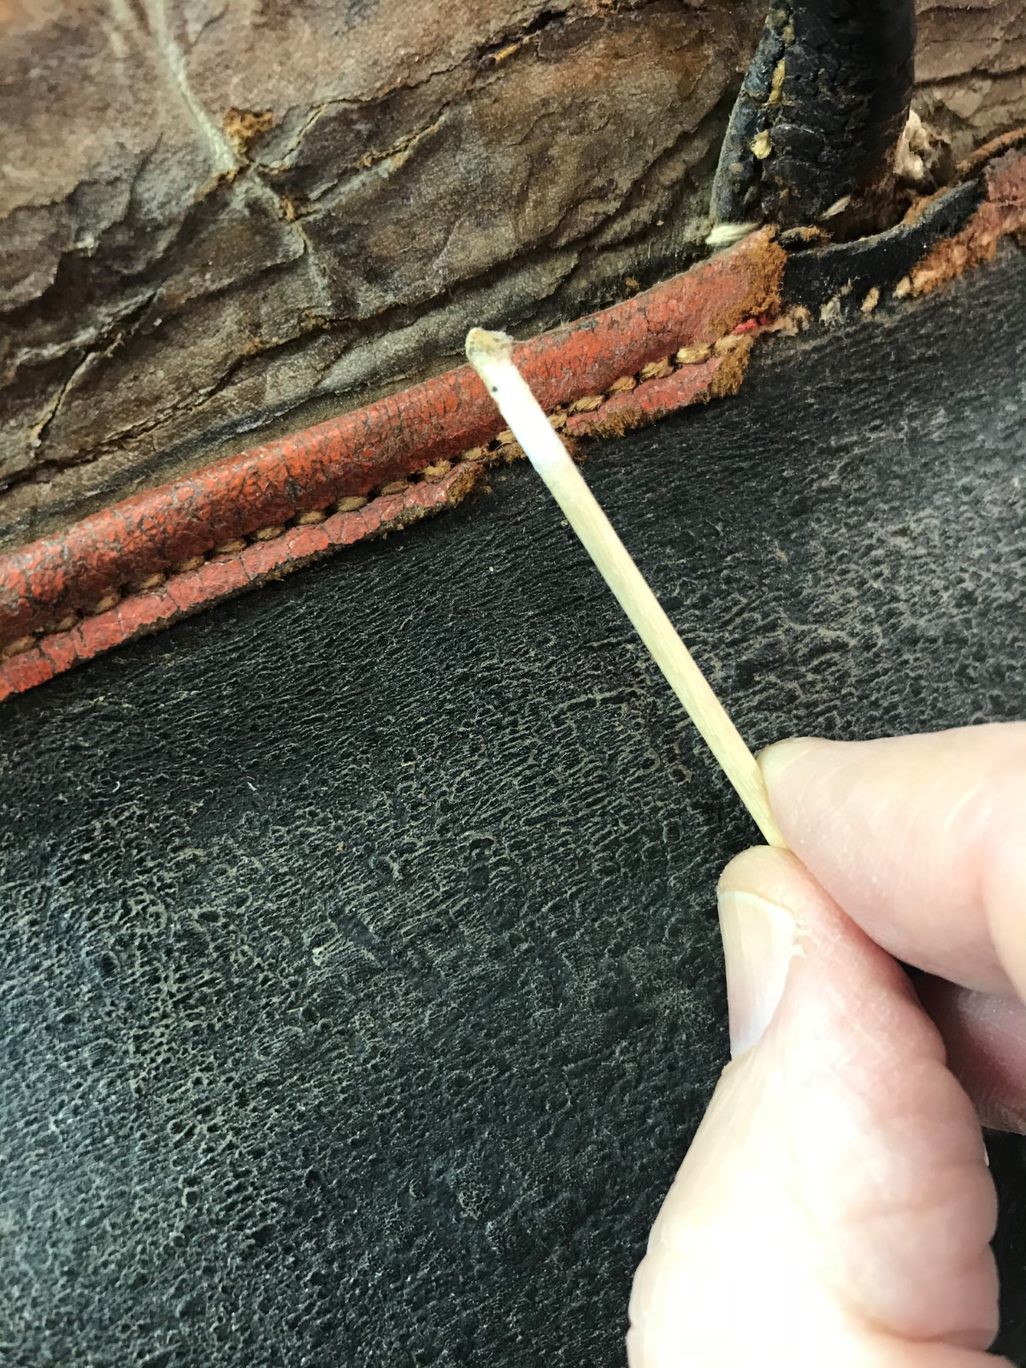 Close up photograph of hand holding small swab which is being used to clean the leather piping of the bag.